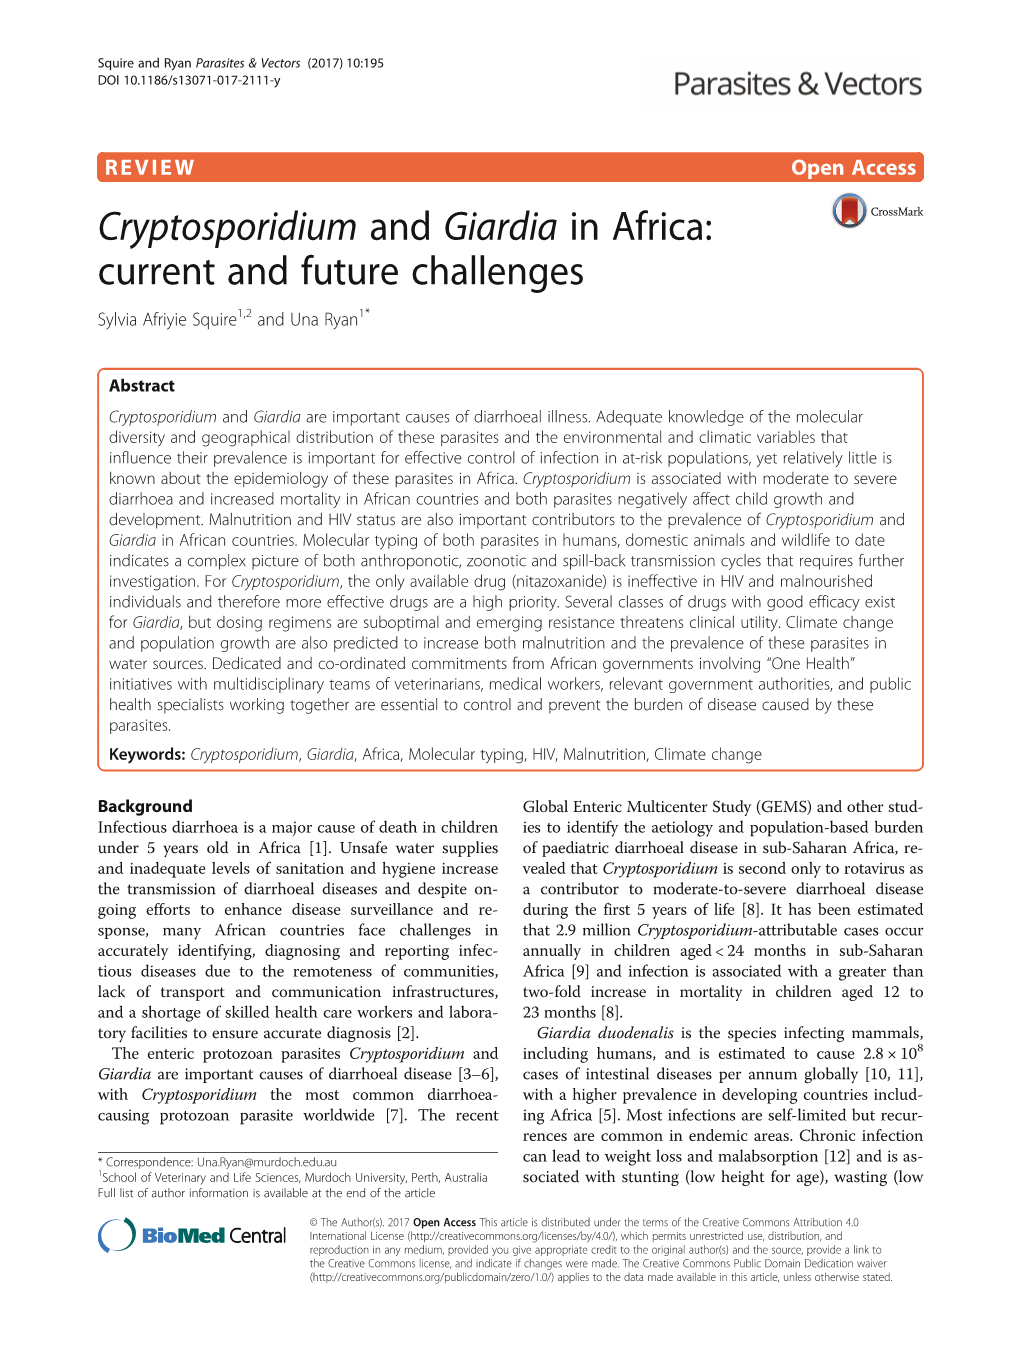 Cryptosporidium and Giardia in Africa: Current and Future Challenges Sylvia Afriyie Squire1,2 and Una Ryan1*